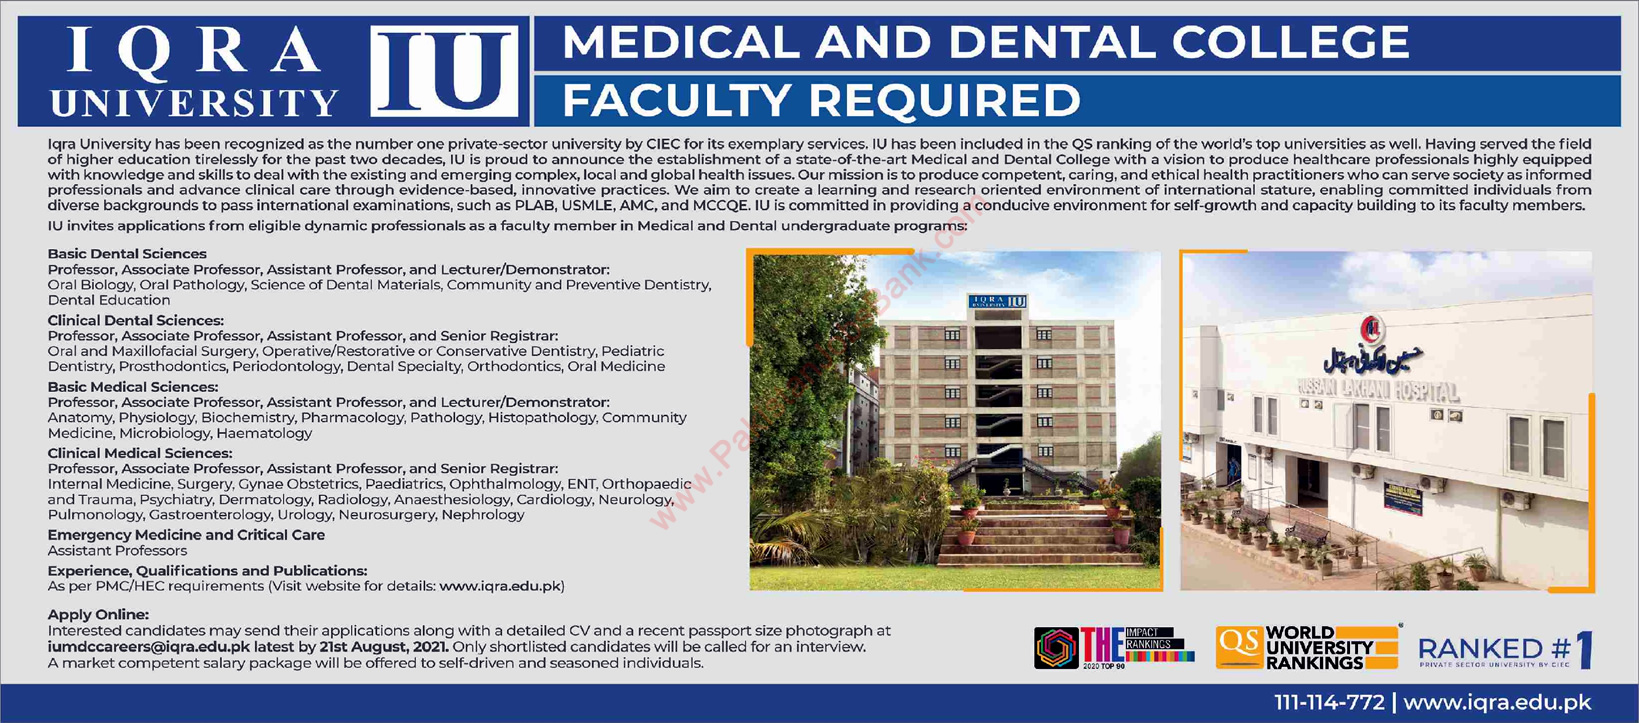 Teaching Faculty Jobs in Iqra University Medical and Dental College August 2021 Latest